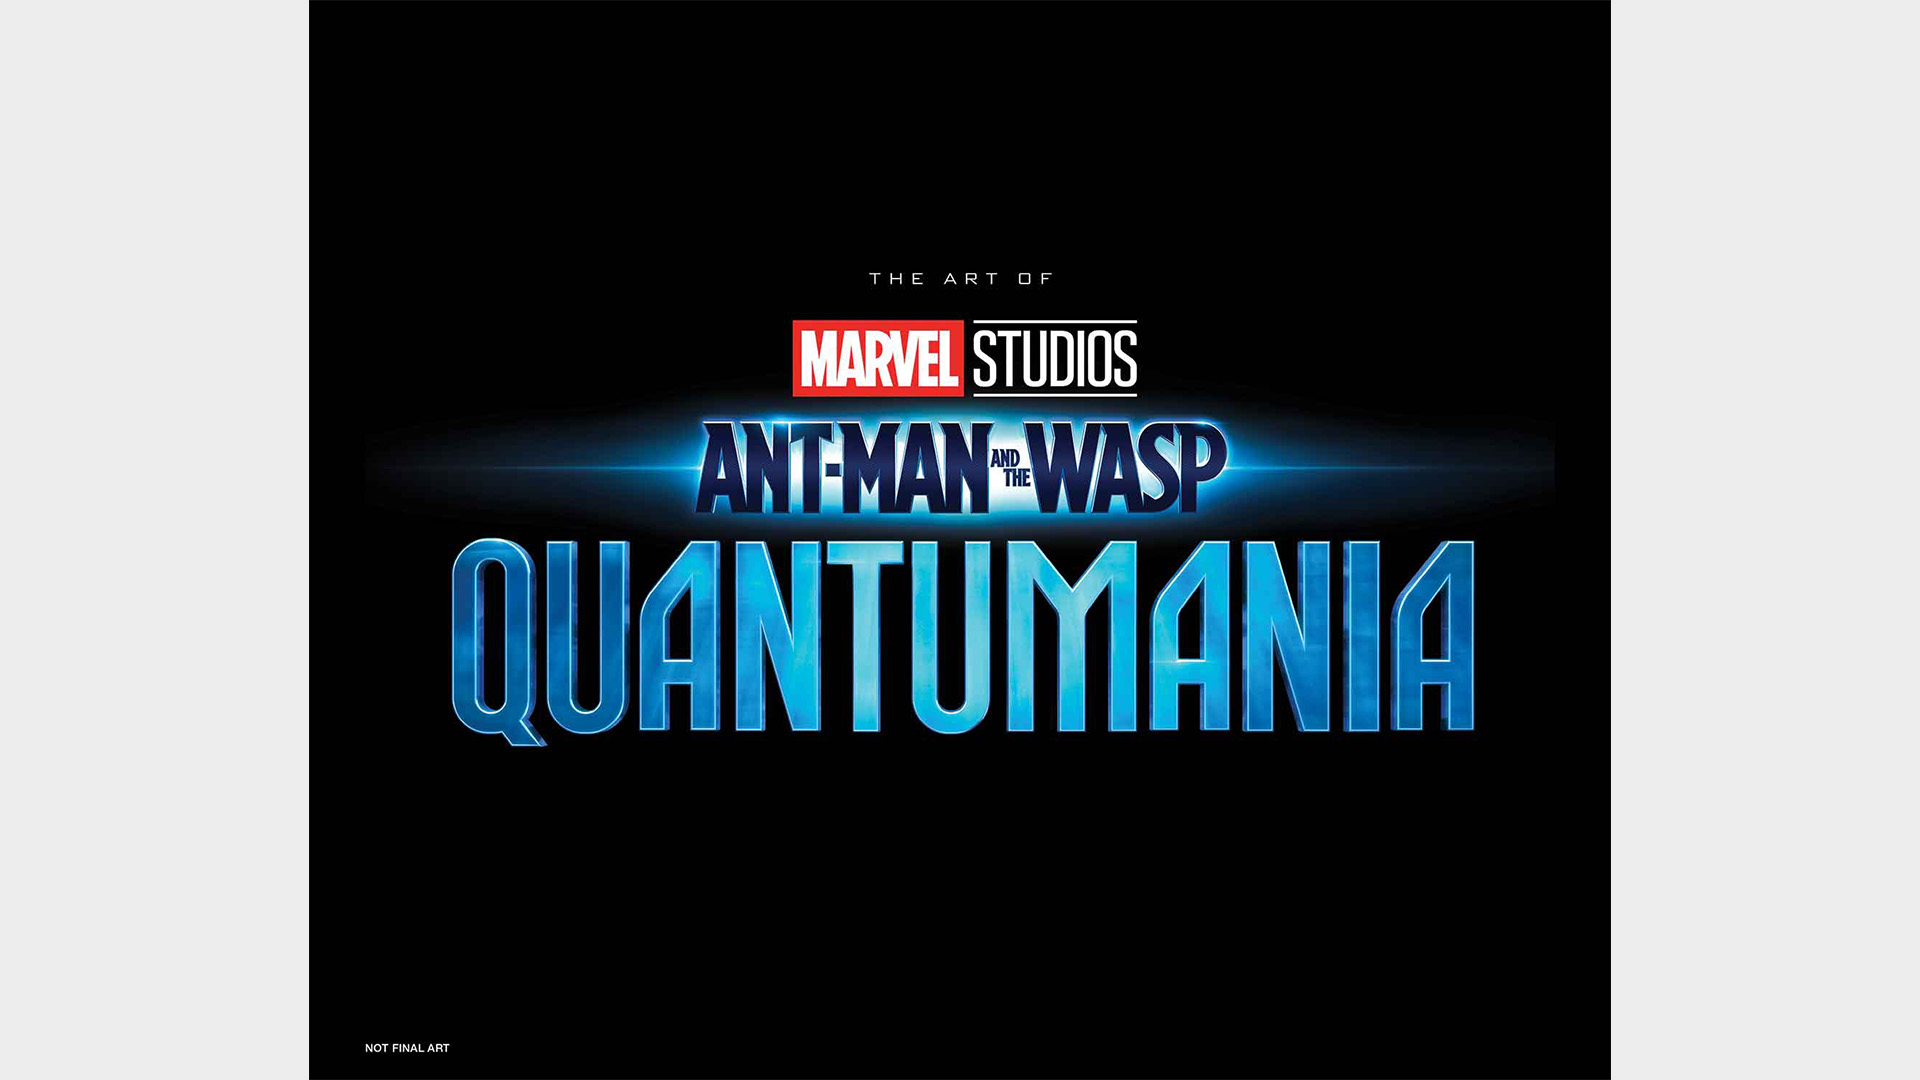 MARVEL STUDIOS’ ANT-MAN & THE WASP: QUANTUMANIA –THE ART OF THE MOVIE HC